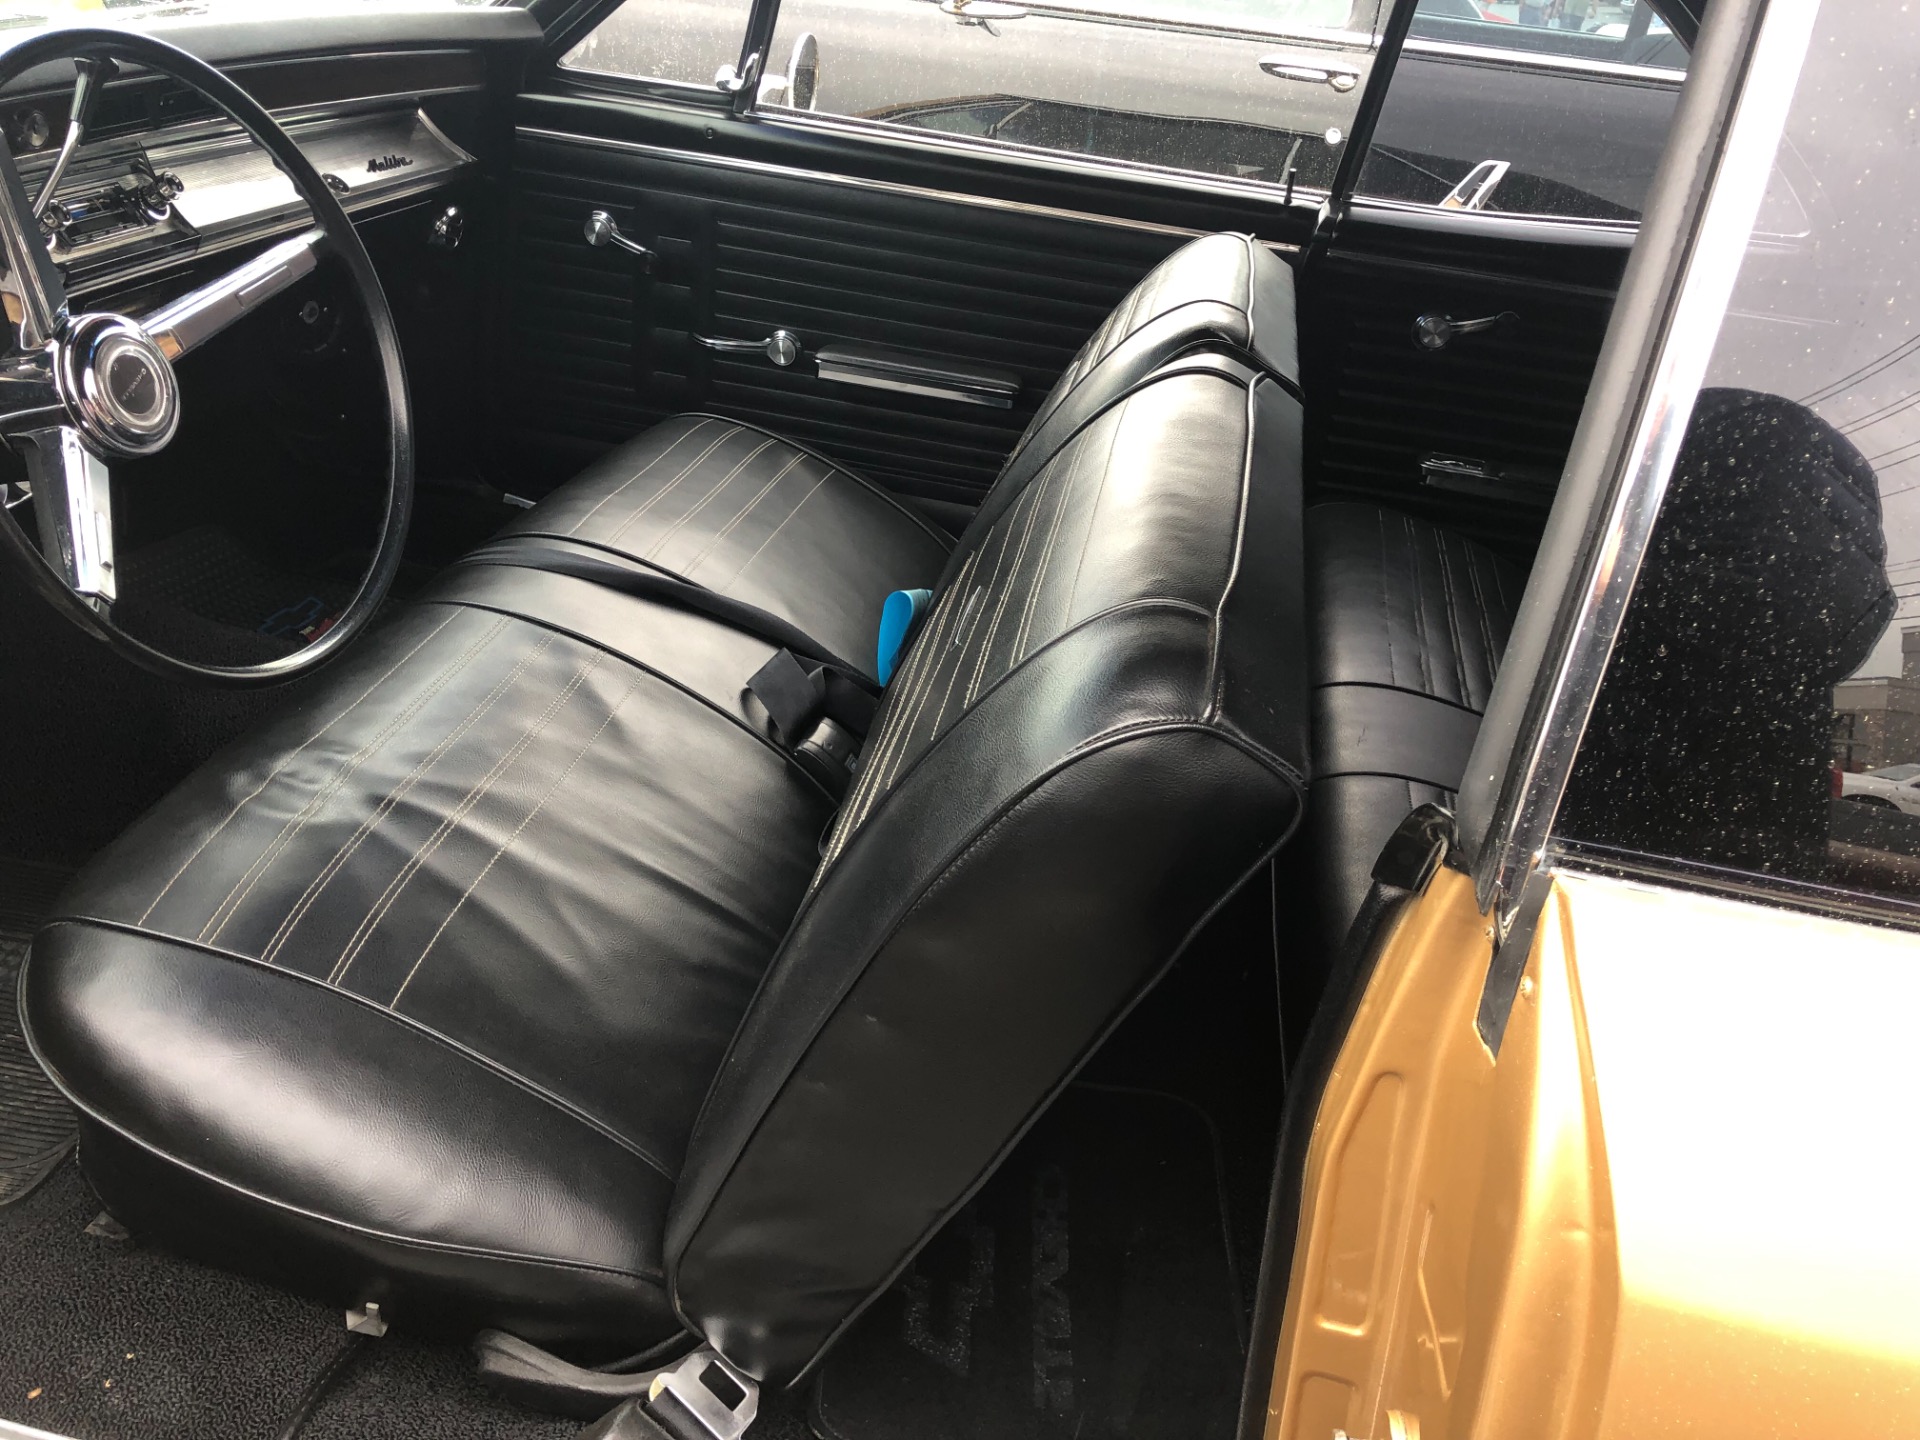 Used 1967 Chevrolet Chevelle -MALIBU 327-AUTOMATIC-AIR CONDITIONING-SOUTHERN CLASSIC- | Mundelein, IL